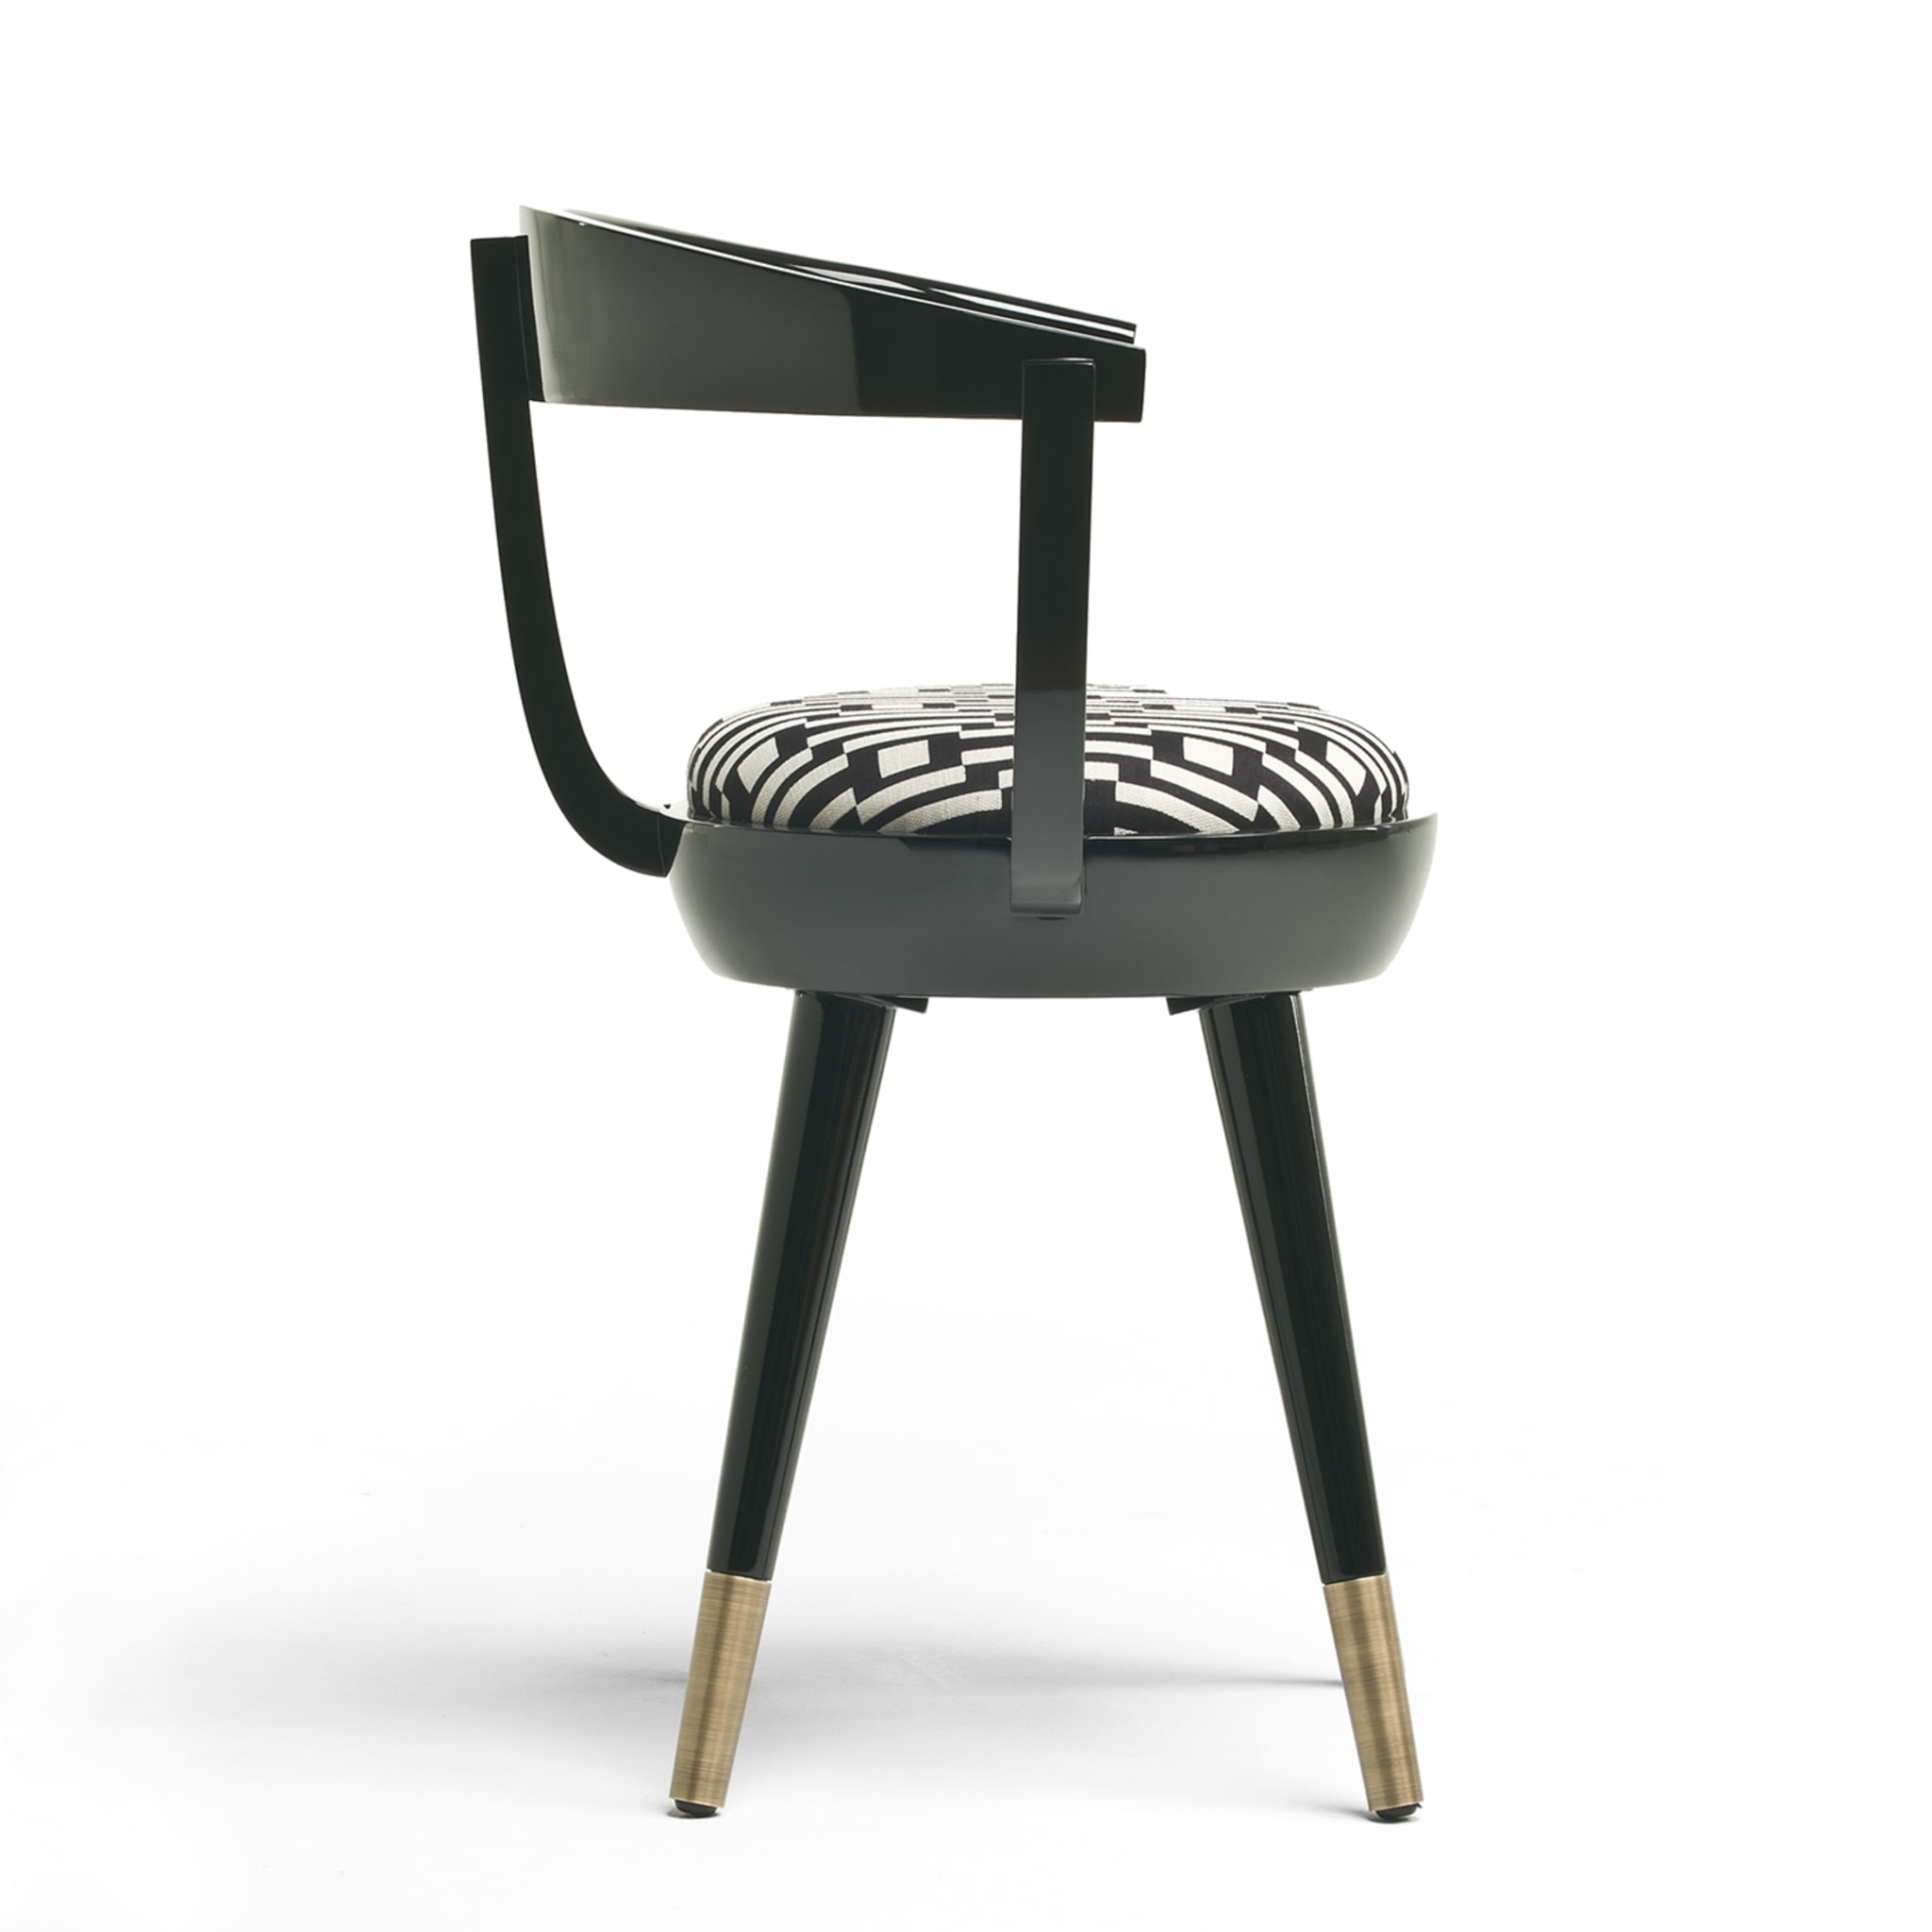 Galleon Dining Chair by Archer Humphryes Architects - Alternative view 2